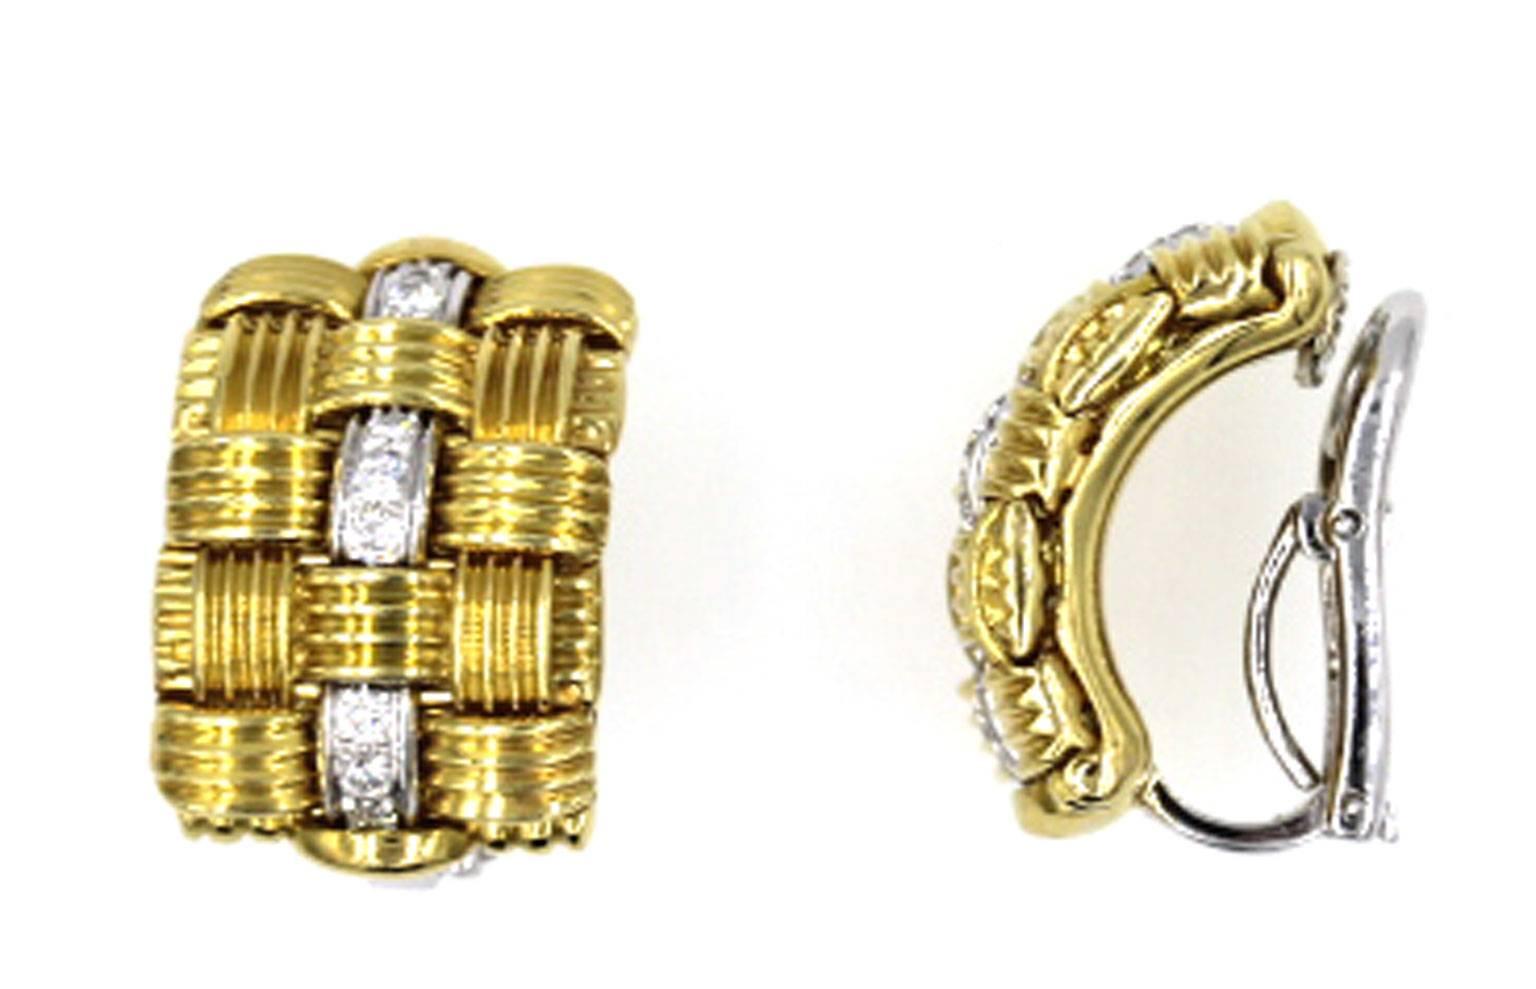 From the Appassionata collection, these stylish earrings by designer Roberto Coin feature 14 round brilliant cut diamonds that equal .28 cttw. The woven 18-karat yellow gold contrasts against the white diamonds set in 18-karat white gold.They